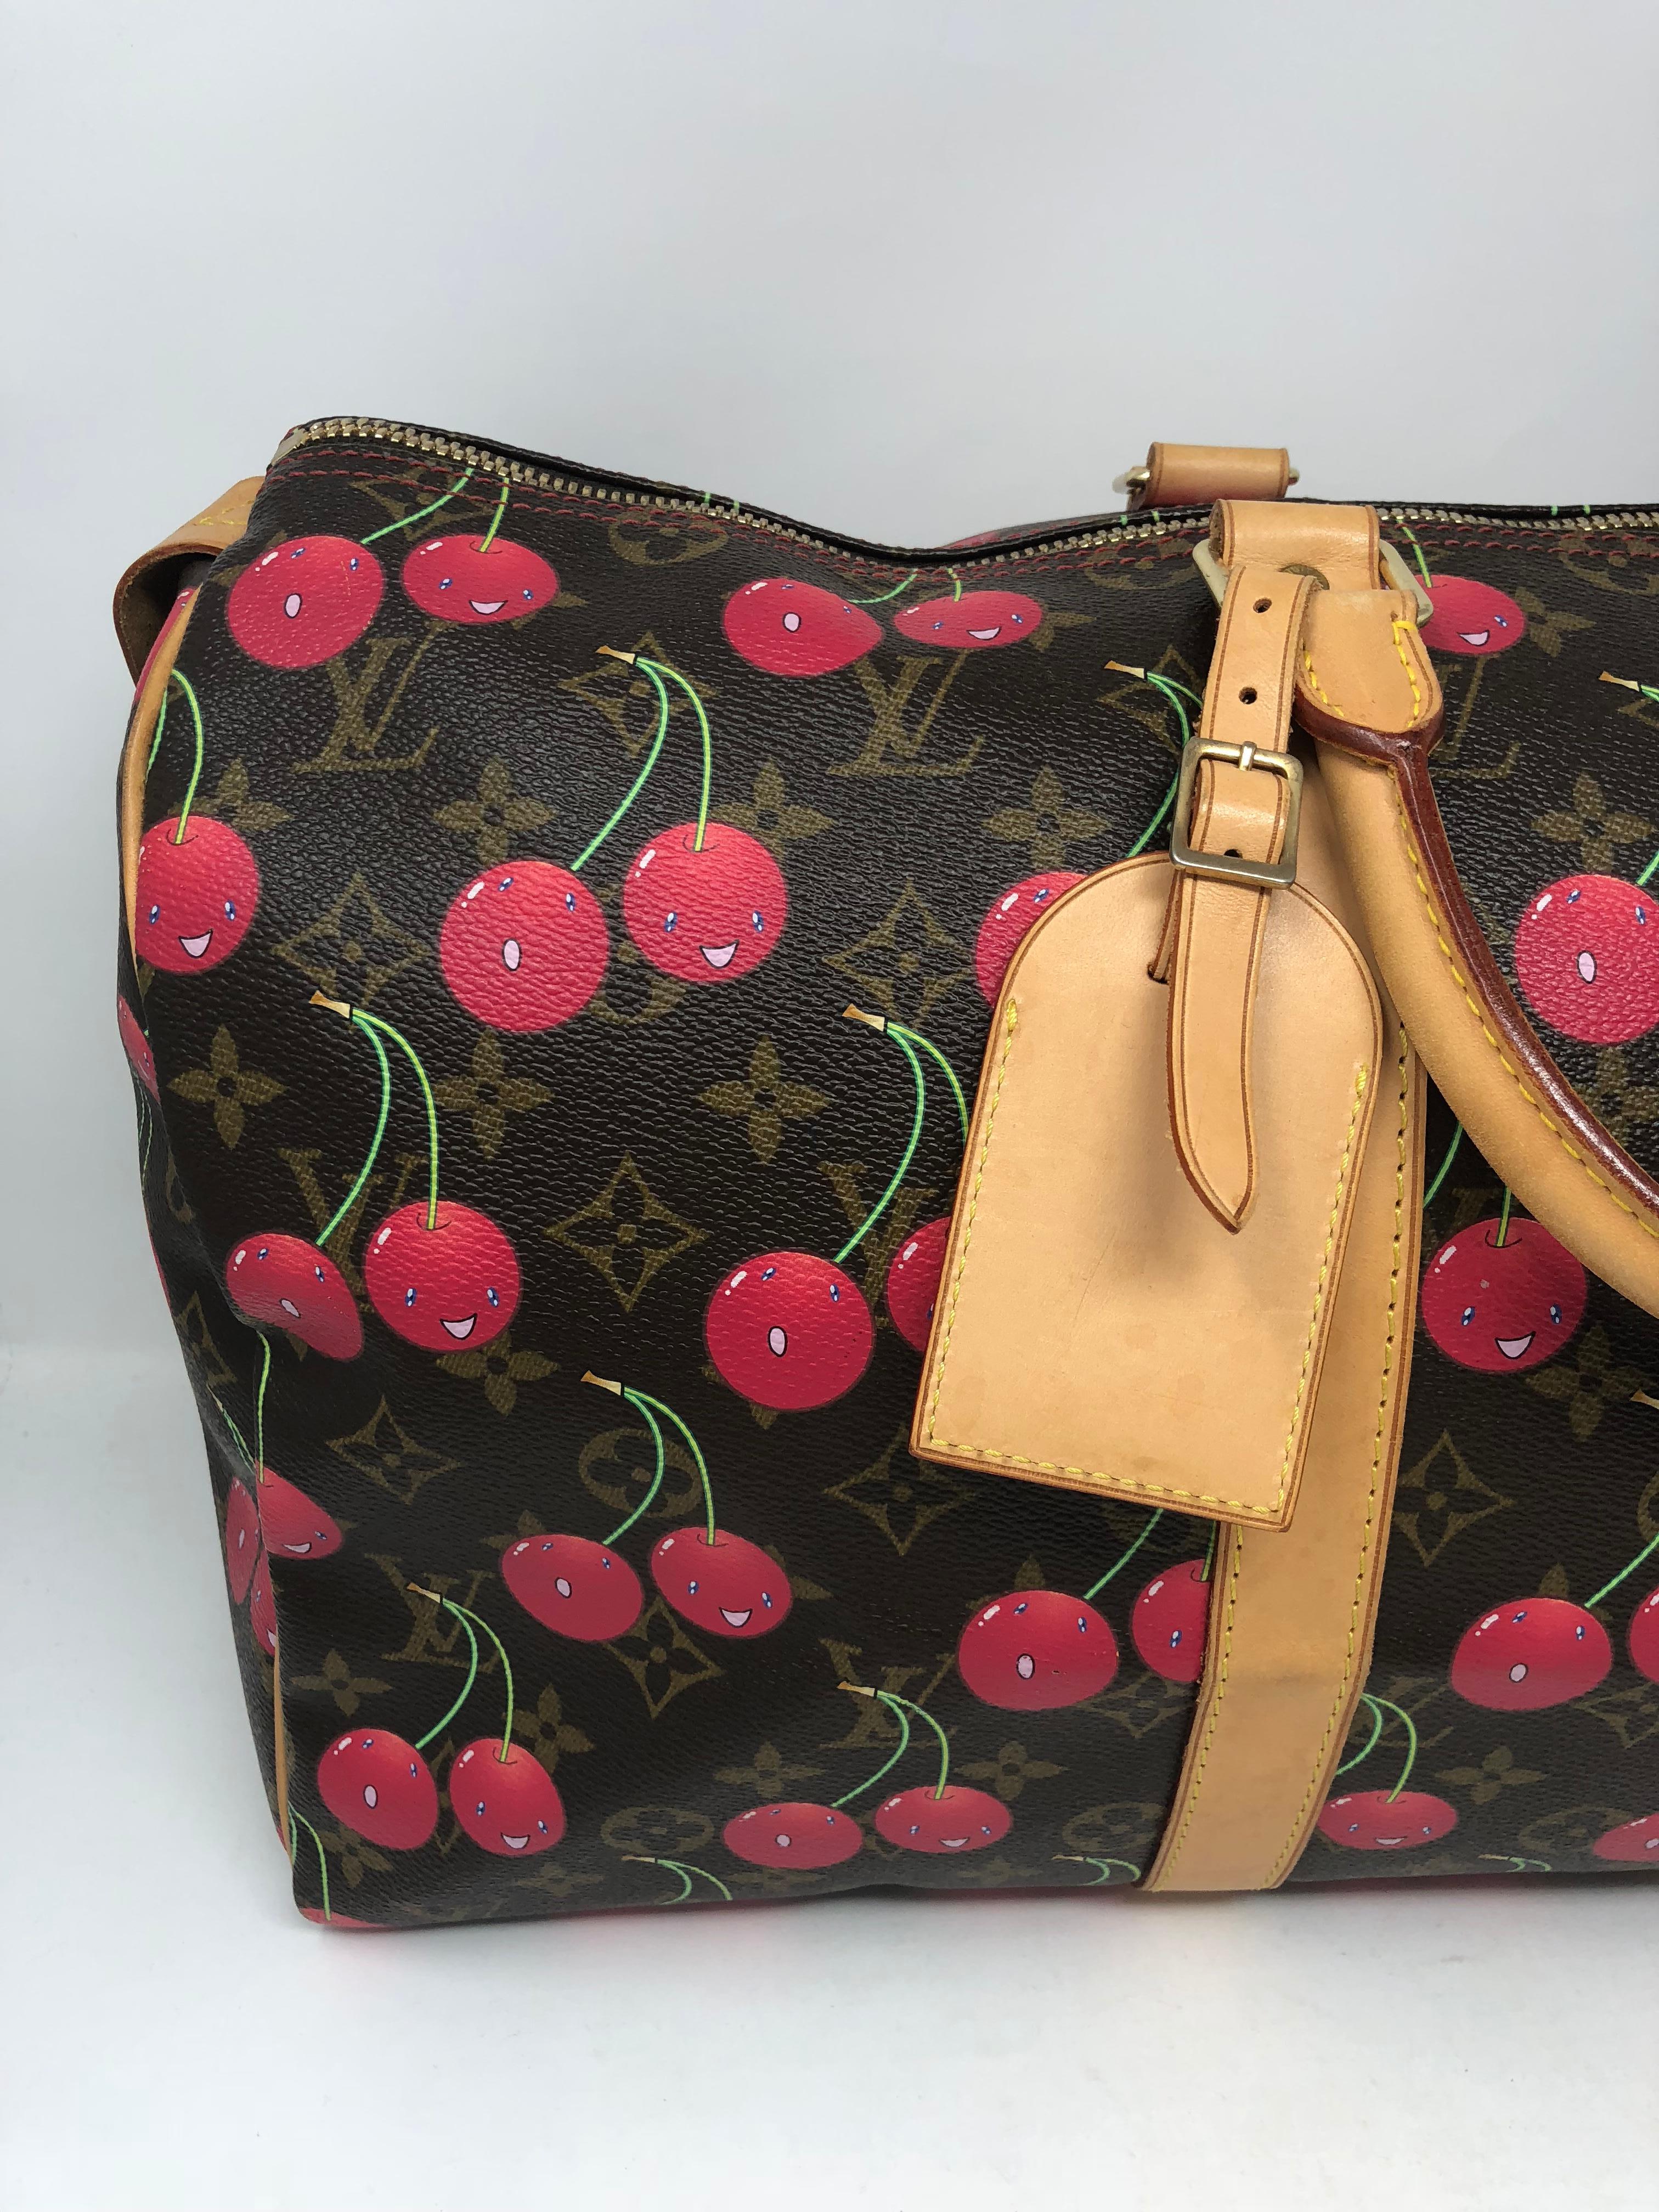 LOUIS VUITTON Monogram Cerises Cherry Keepall 45 
limited edition release designed by Takashi Murakami
Date code: TH1024